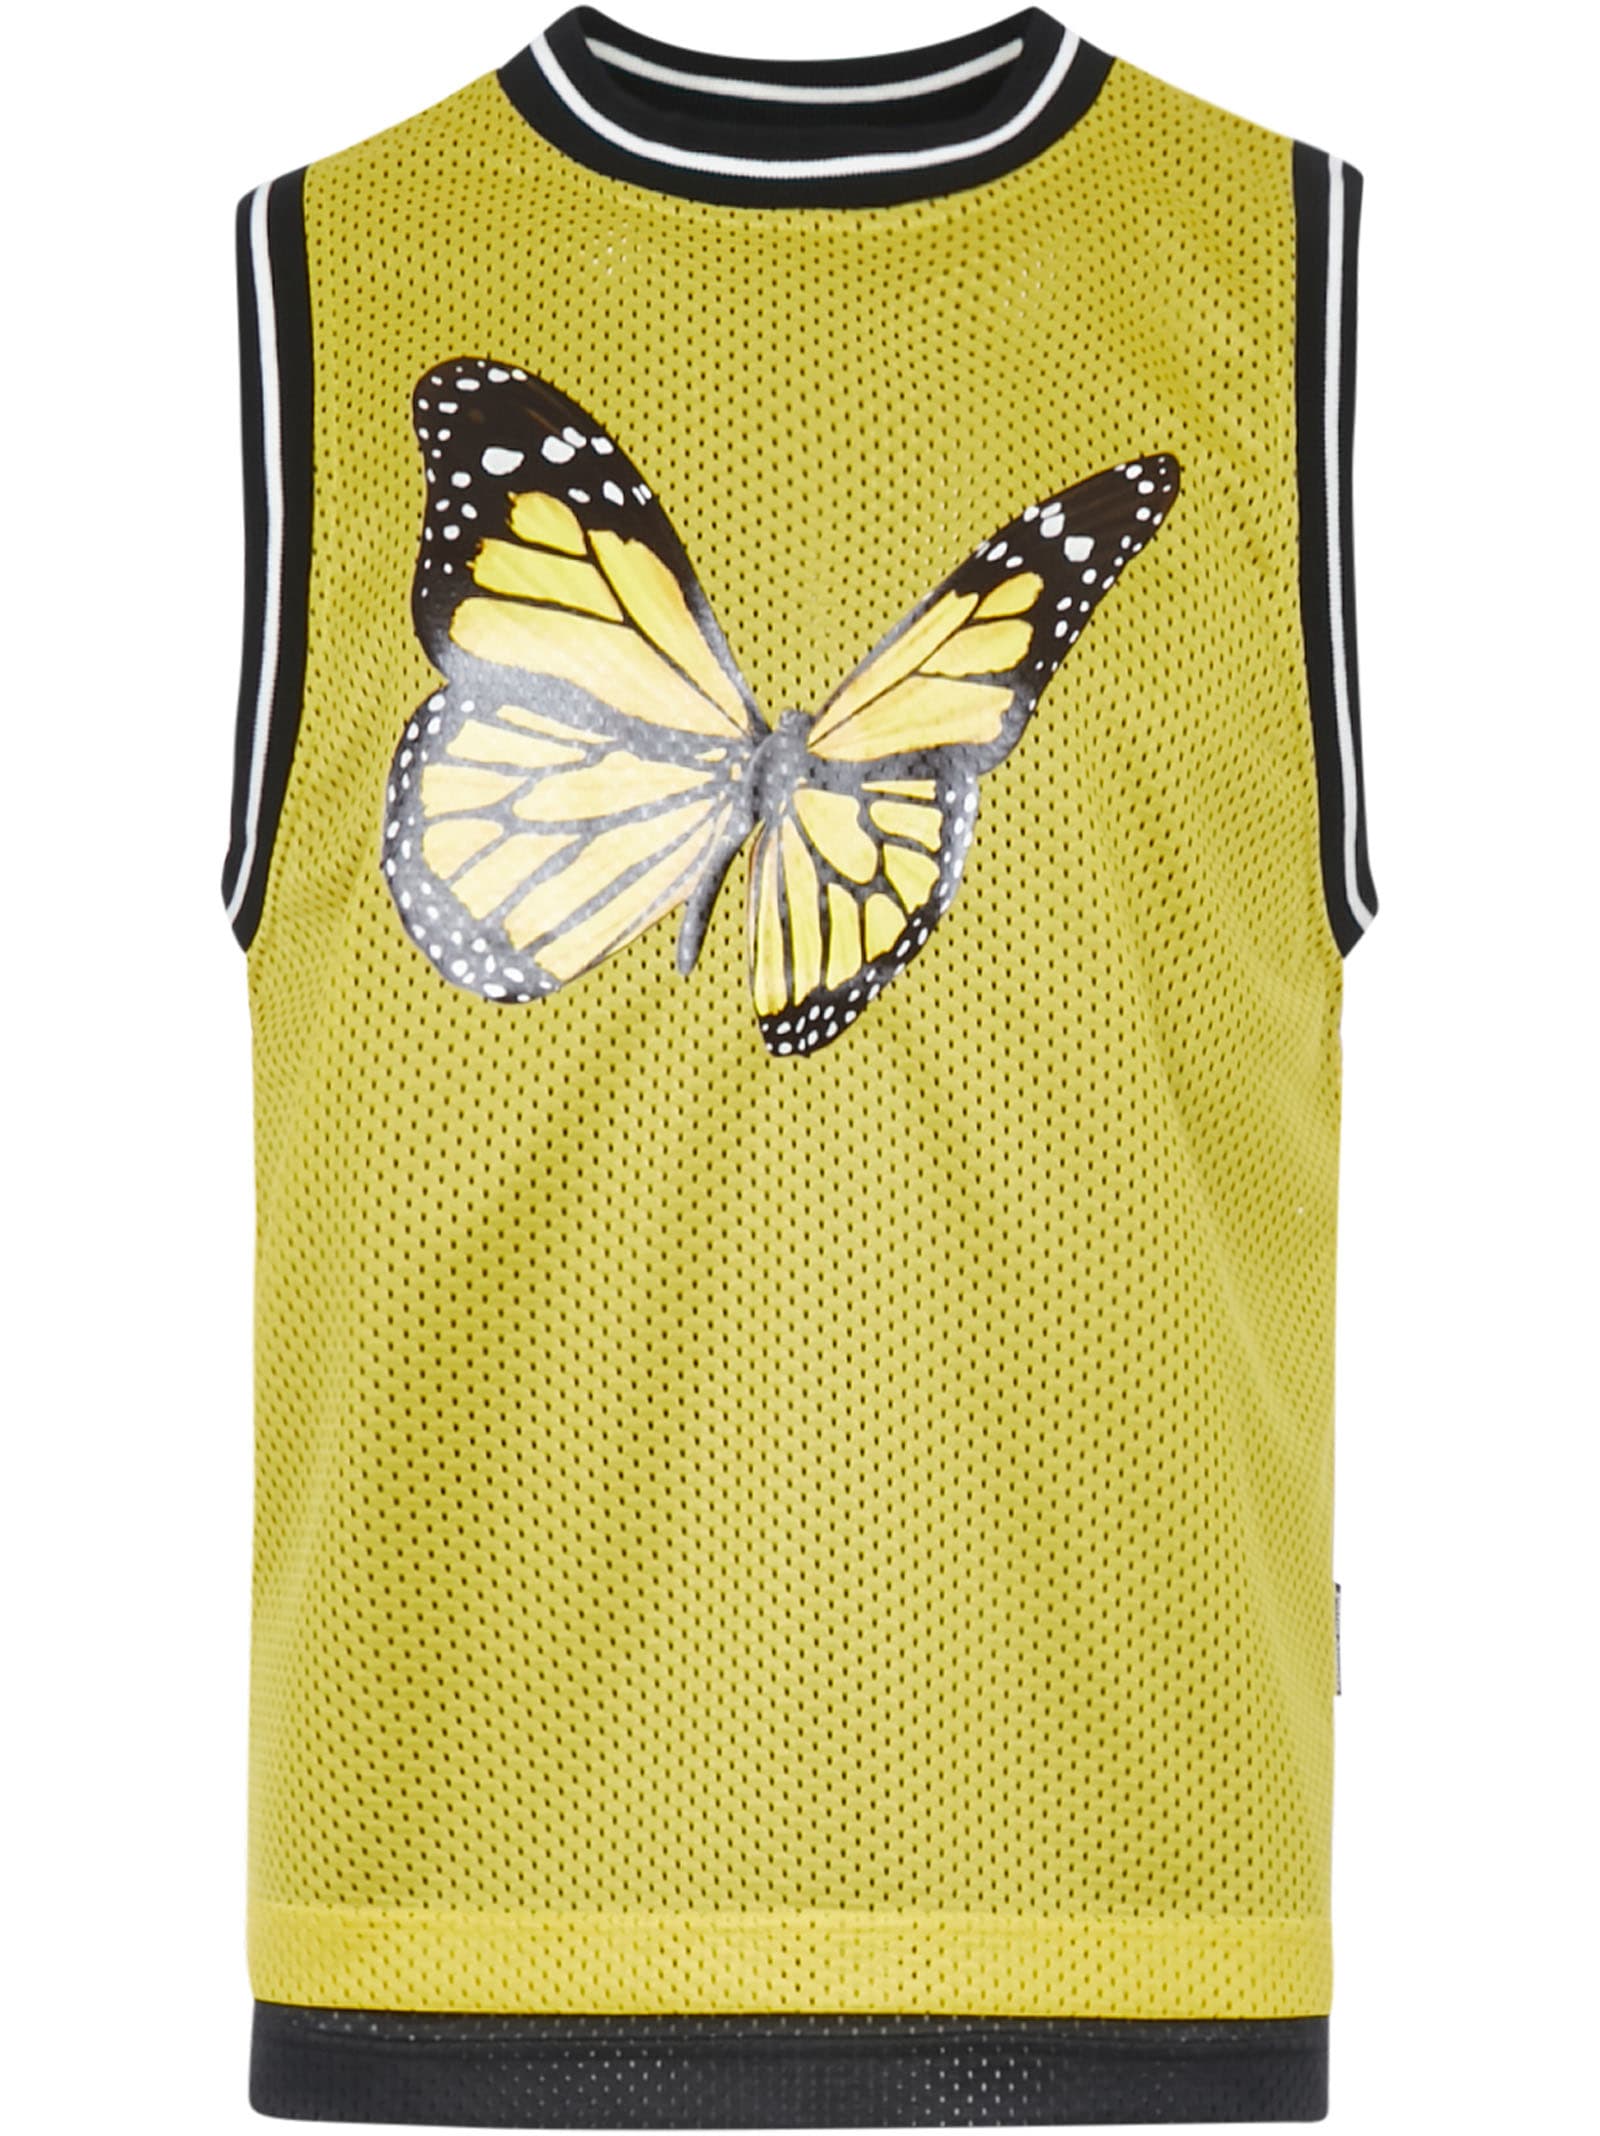 PALM ANGELS BUTTERFLY TANK TOP,11298305